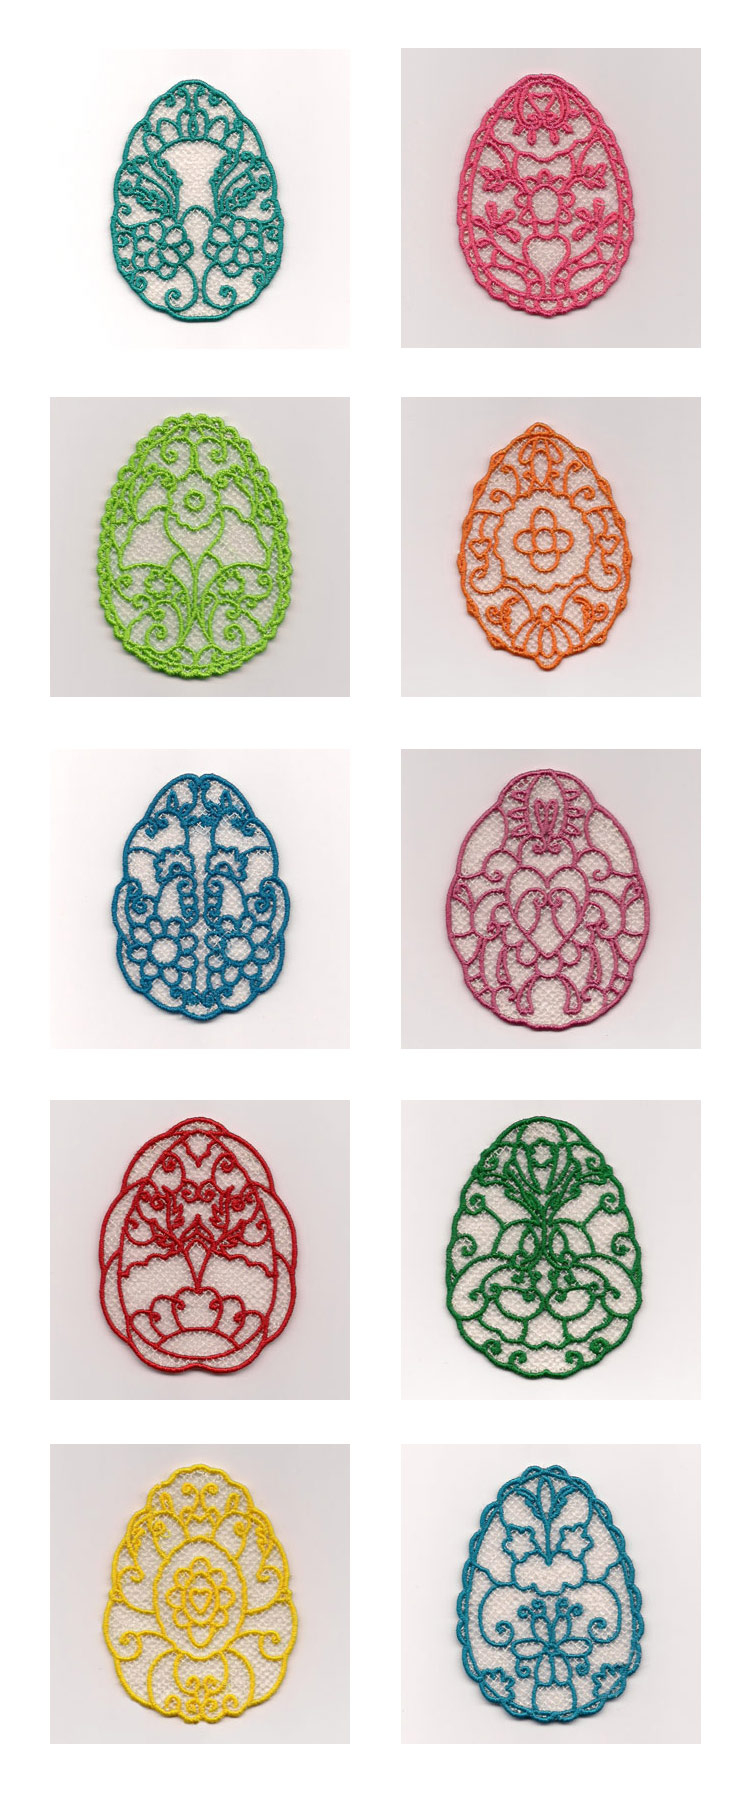 Machine Embroidery Lace Patterns Machine Embroidery Designs Fsl Decorative Easter Eggs Set